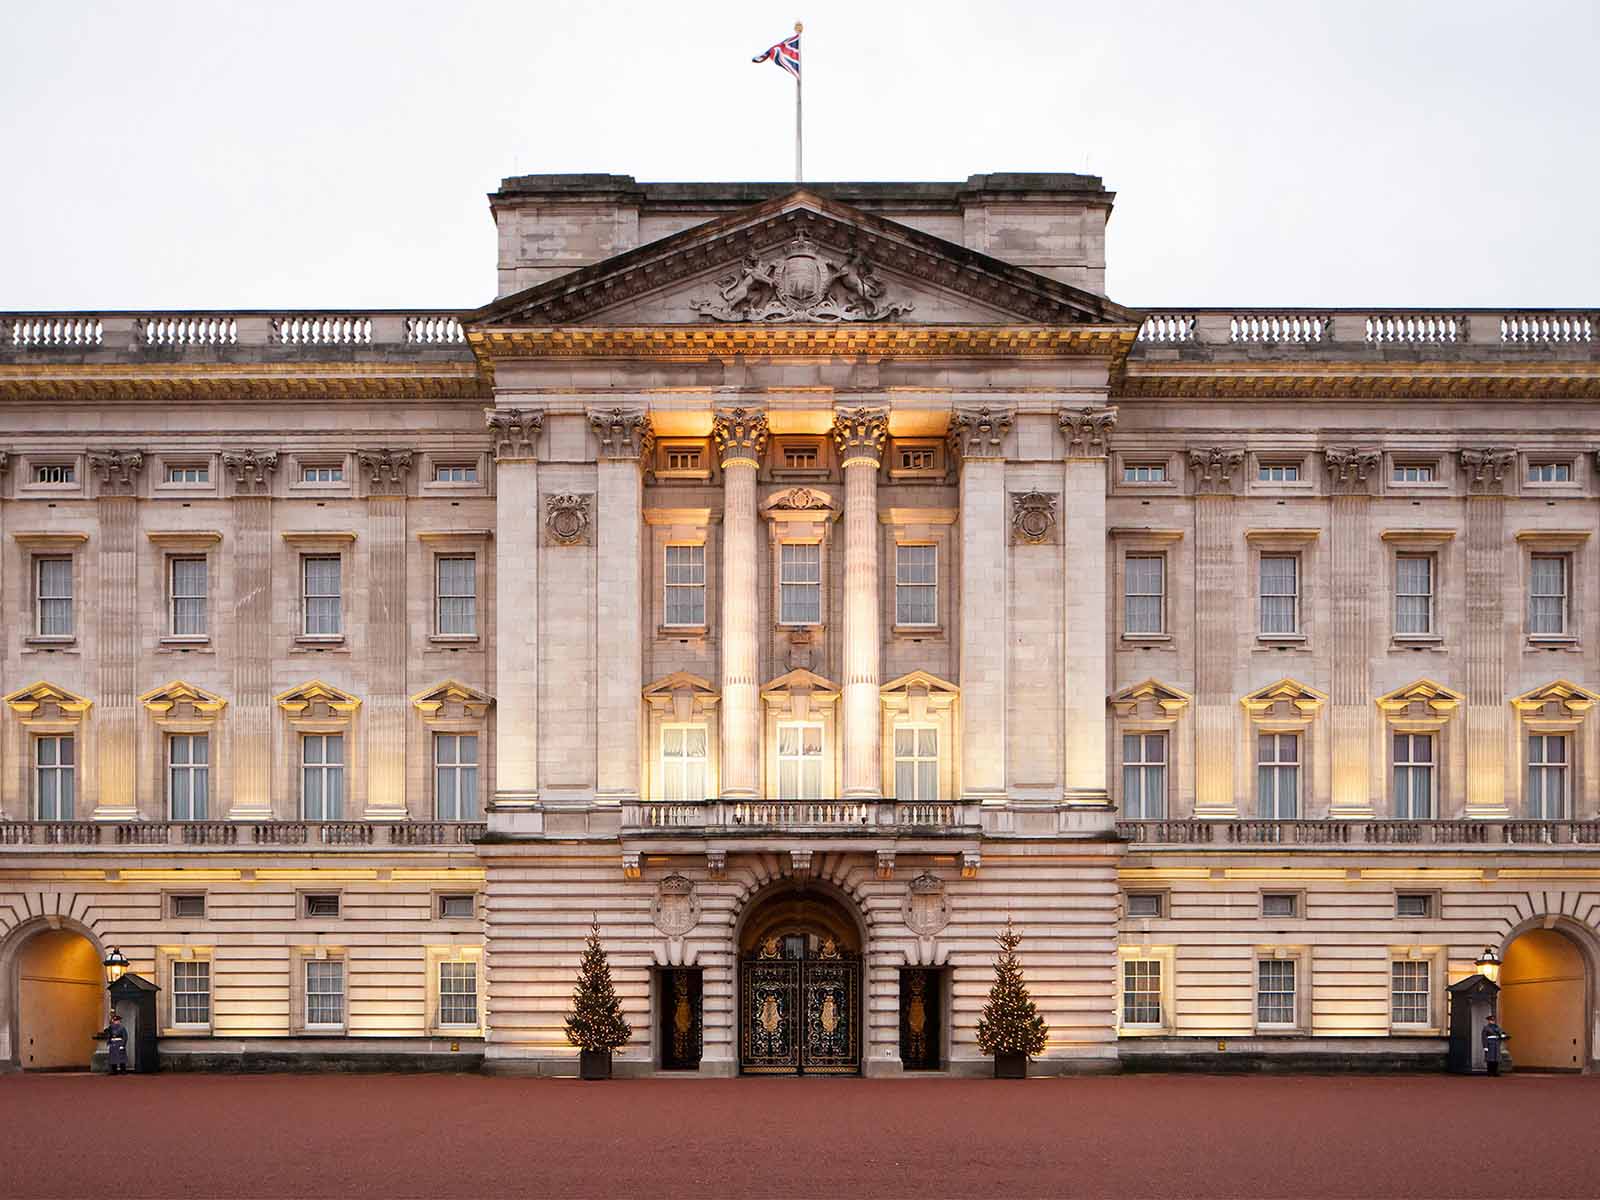 Work is underway at Buckingham Palace as Queen Elizabeth gets a ten-year renovation project started. But is her net worth funding it?